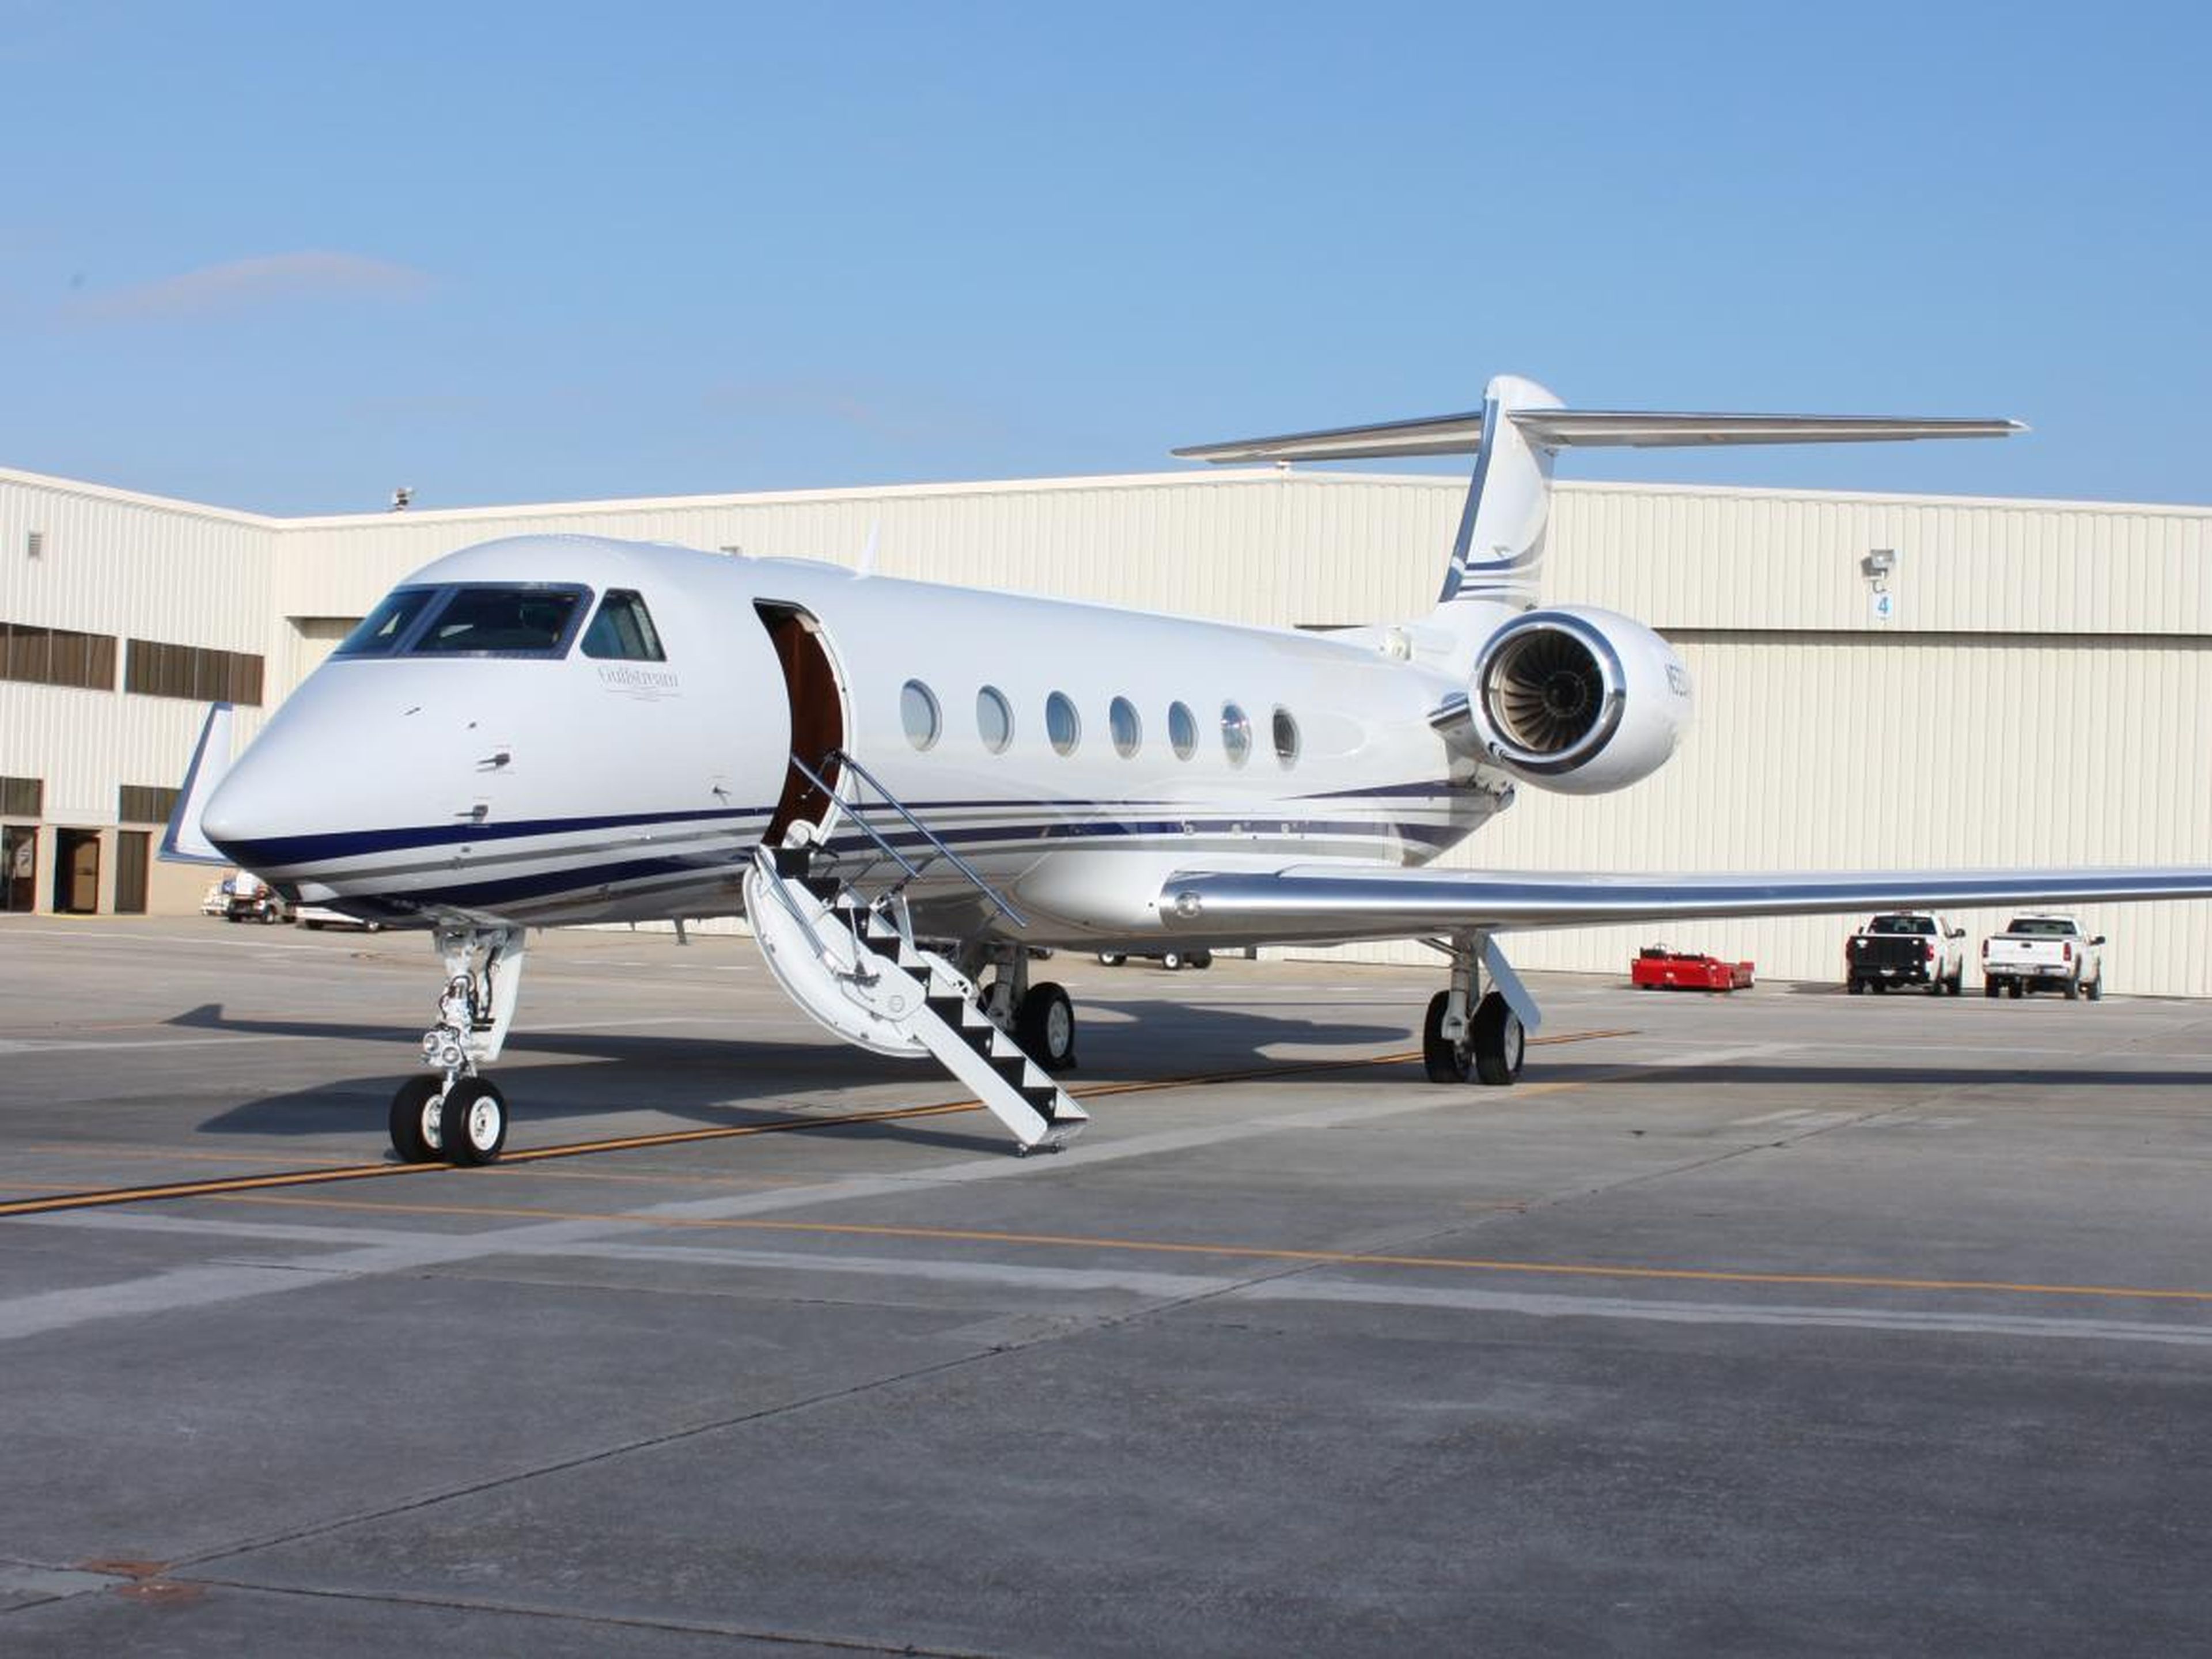 He likes to travel in style and owns a Gulfstream G550 private jet, worth about $54 million.